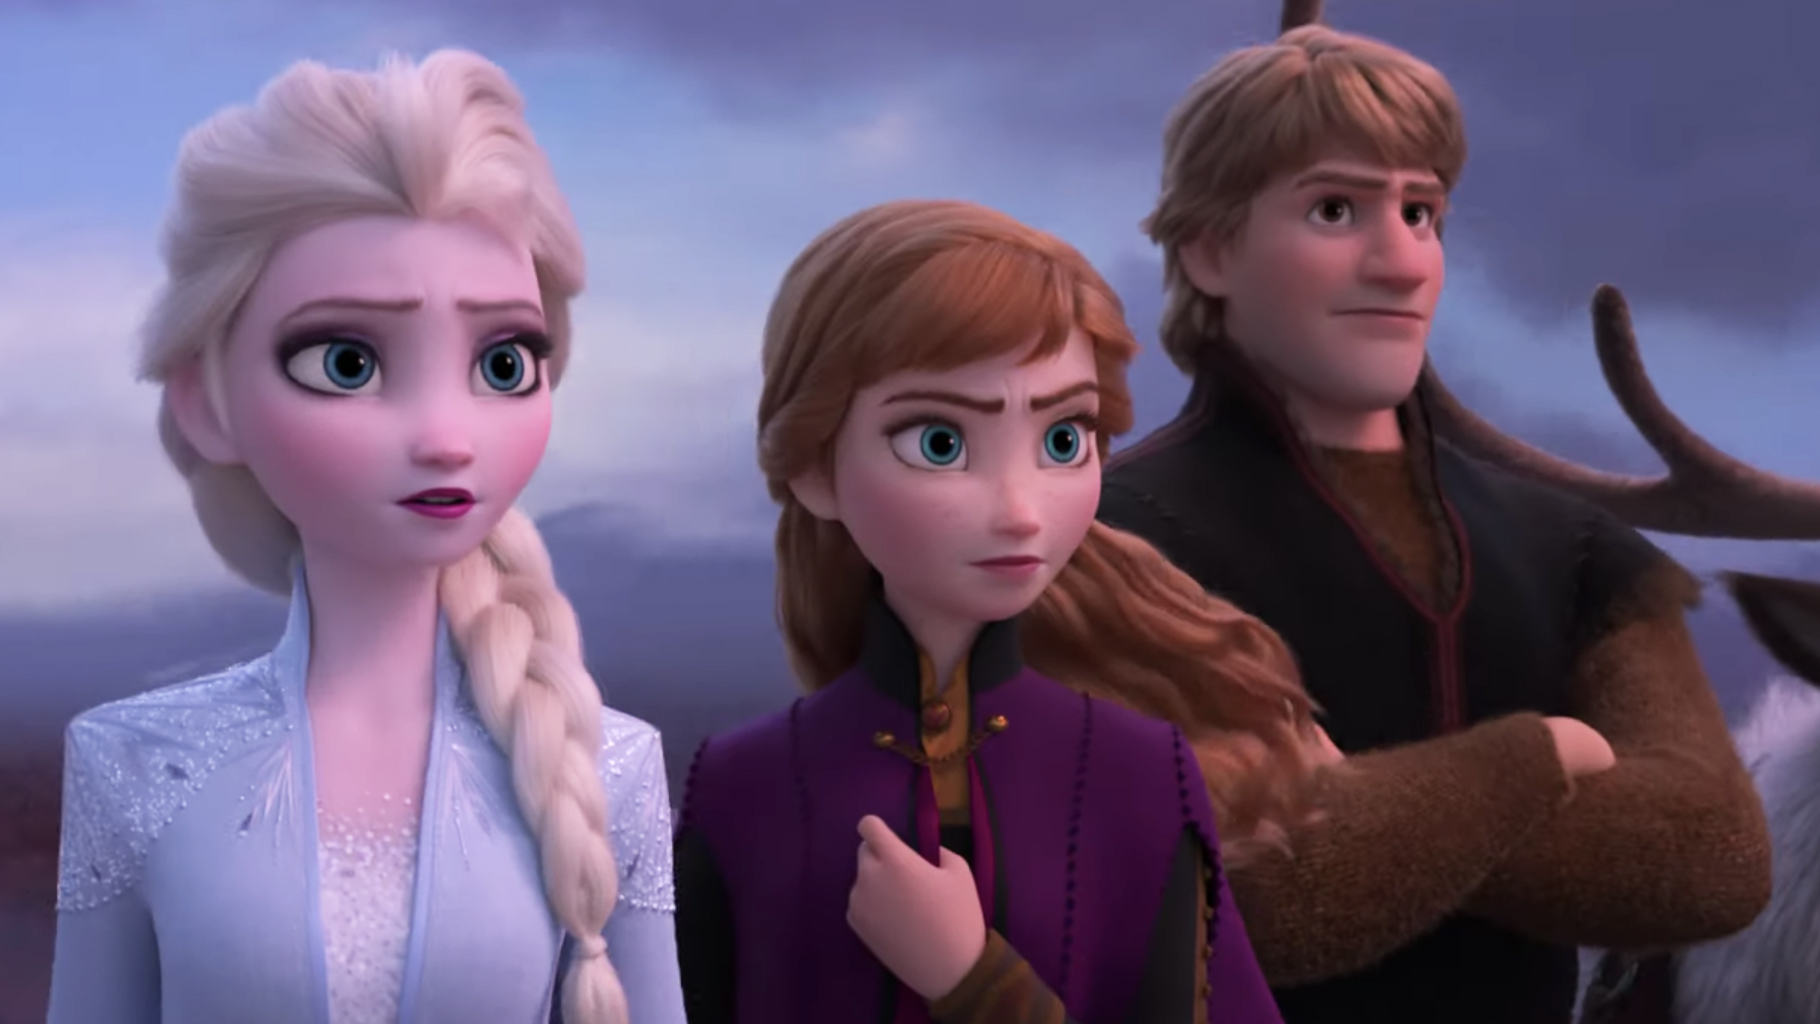 Frozen 2 Teaser Trailer: Elsa, Anna, Olaf, And Kristoff Are Back In